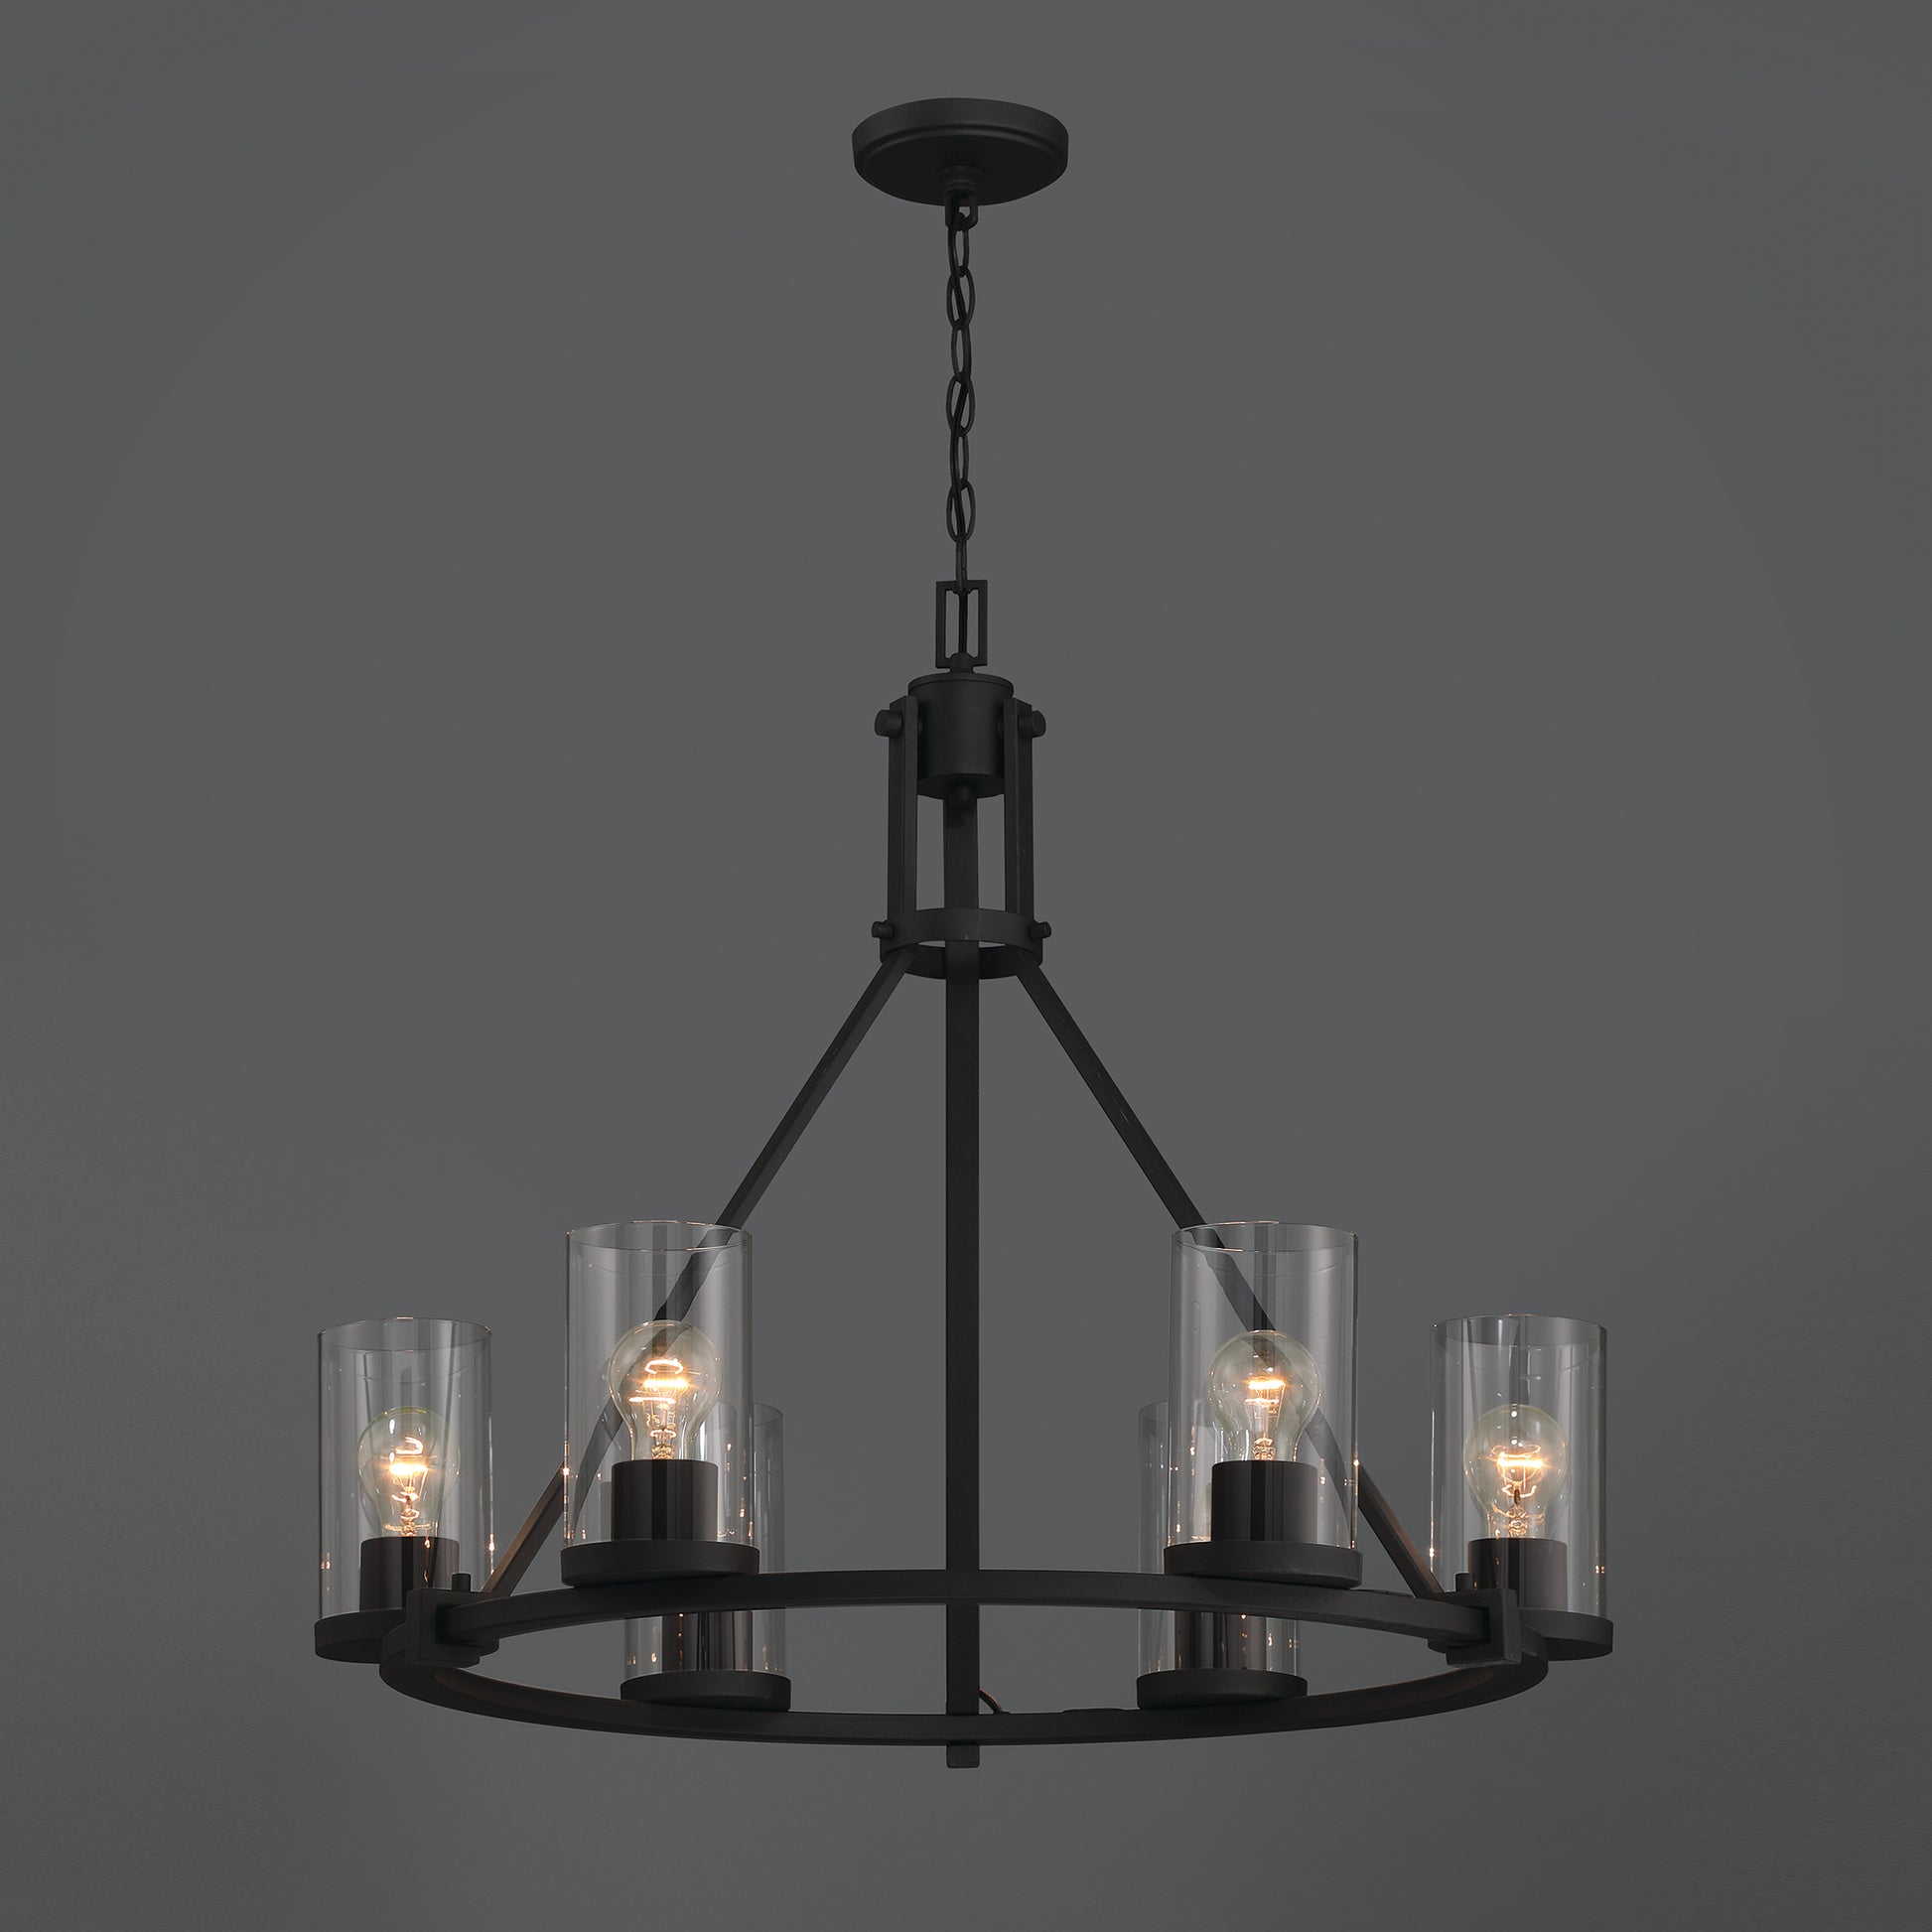 6 light classic wagon wheel chandelier (7) by ACROMA